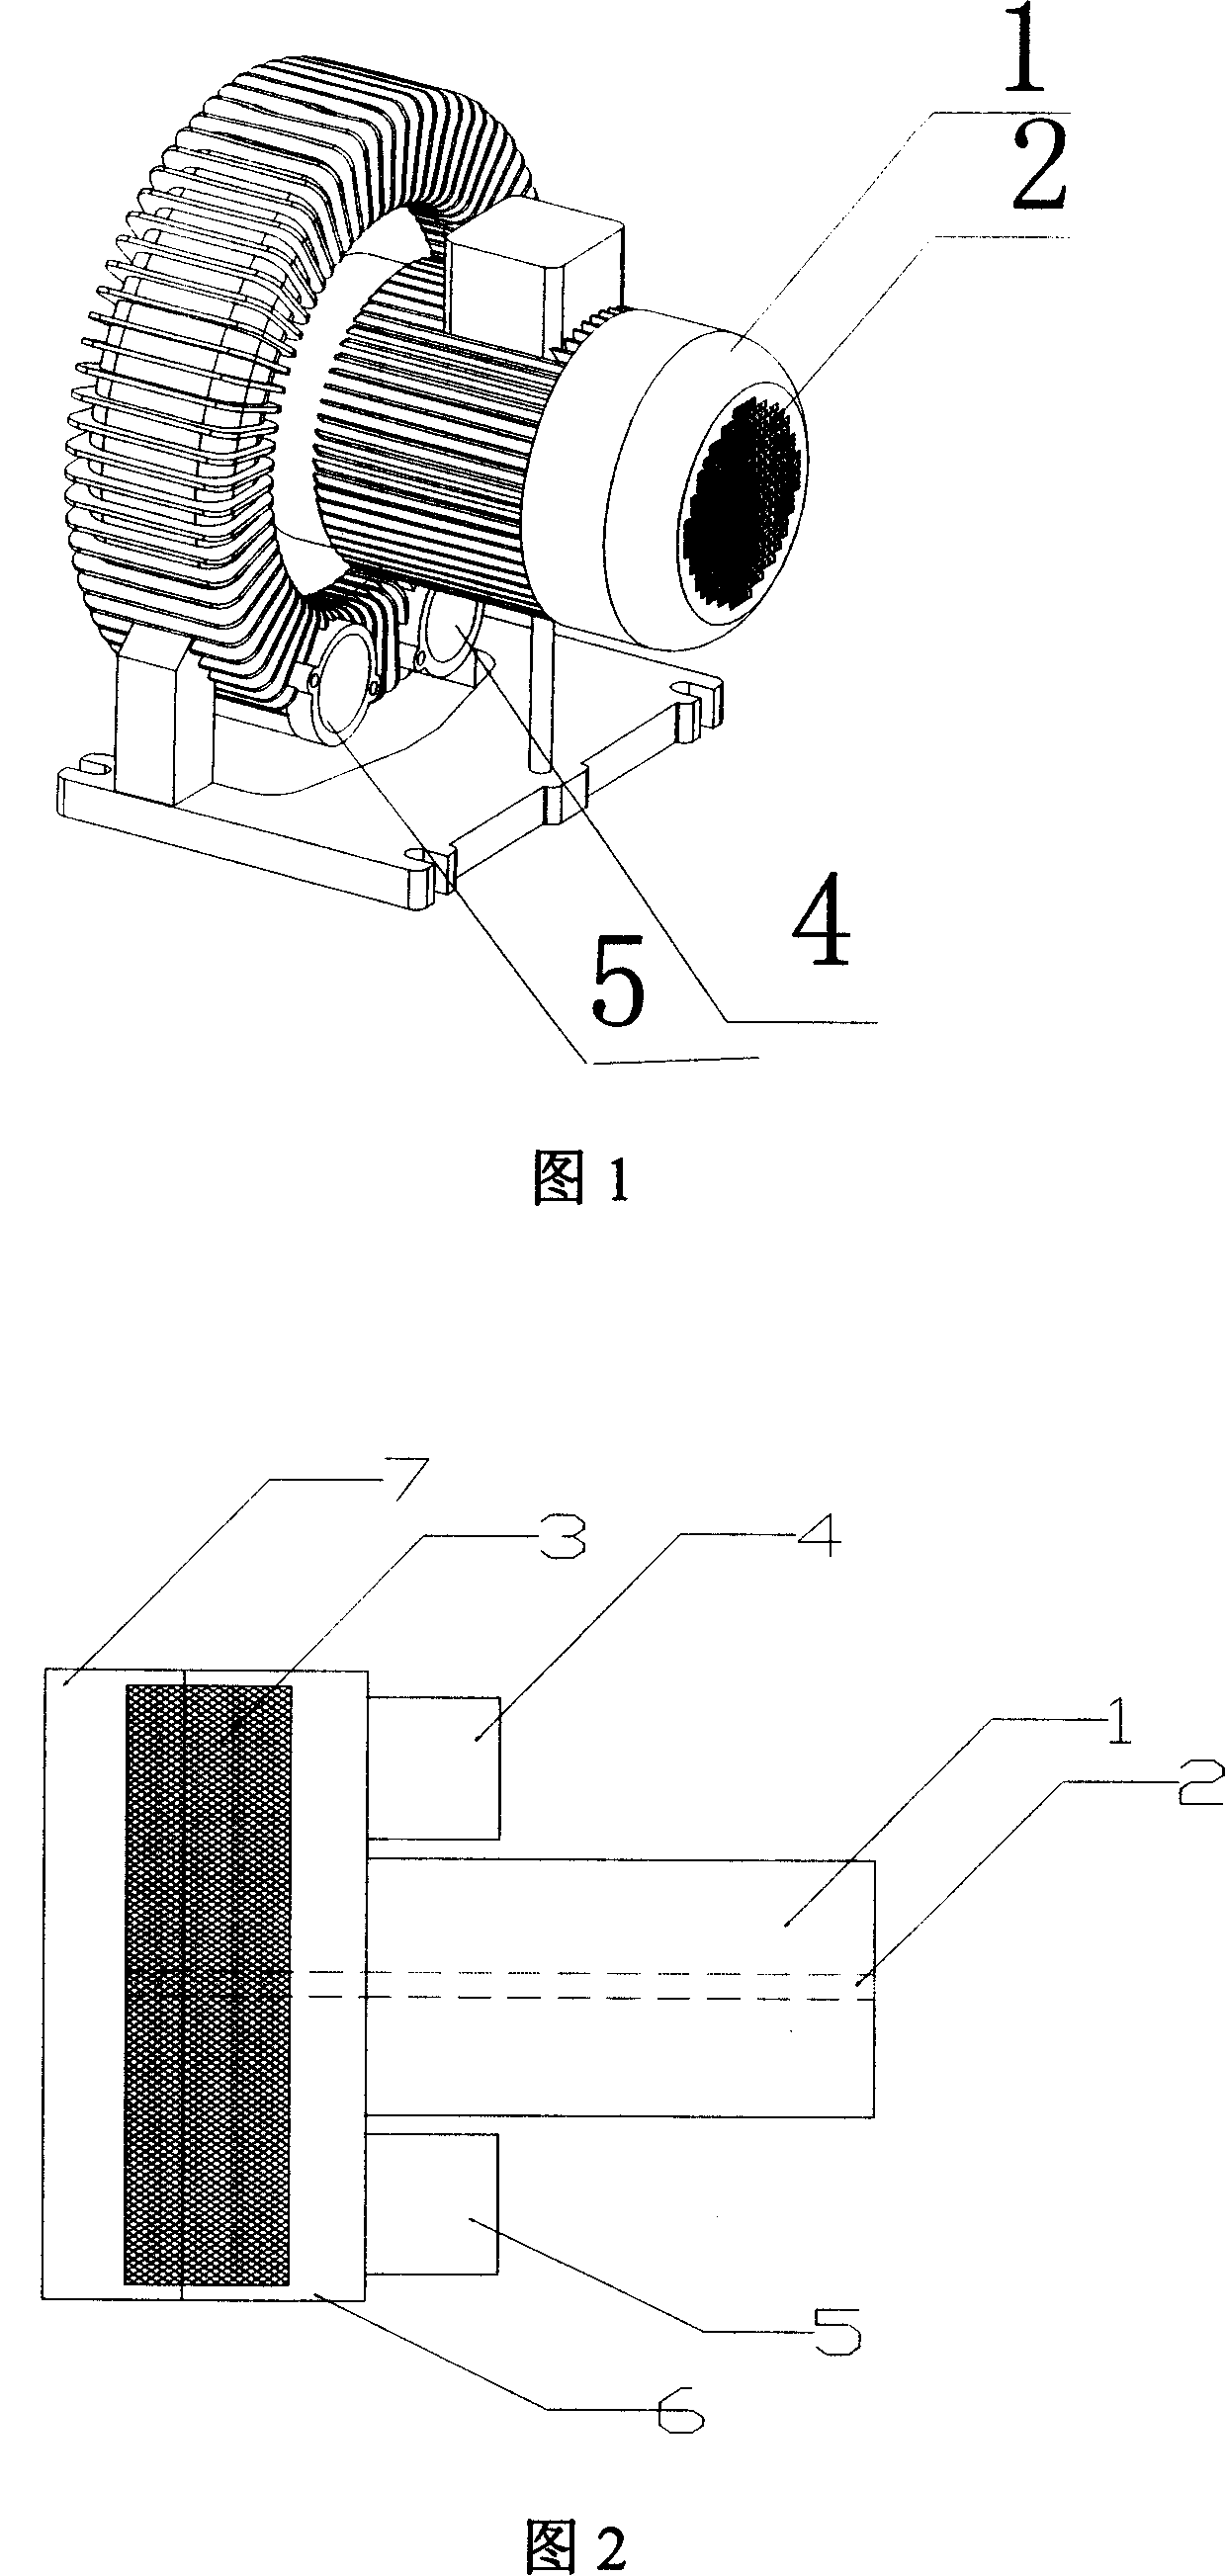 Design of ultra-applanation fuel battery engines air conveying device